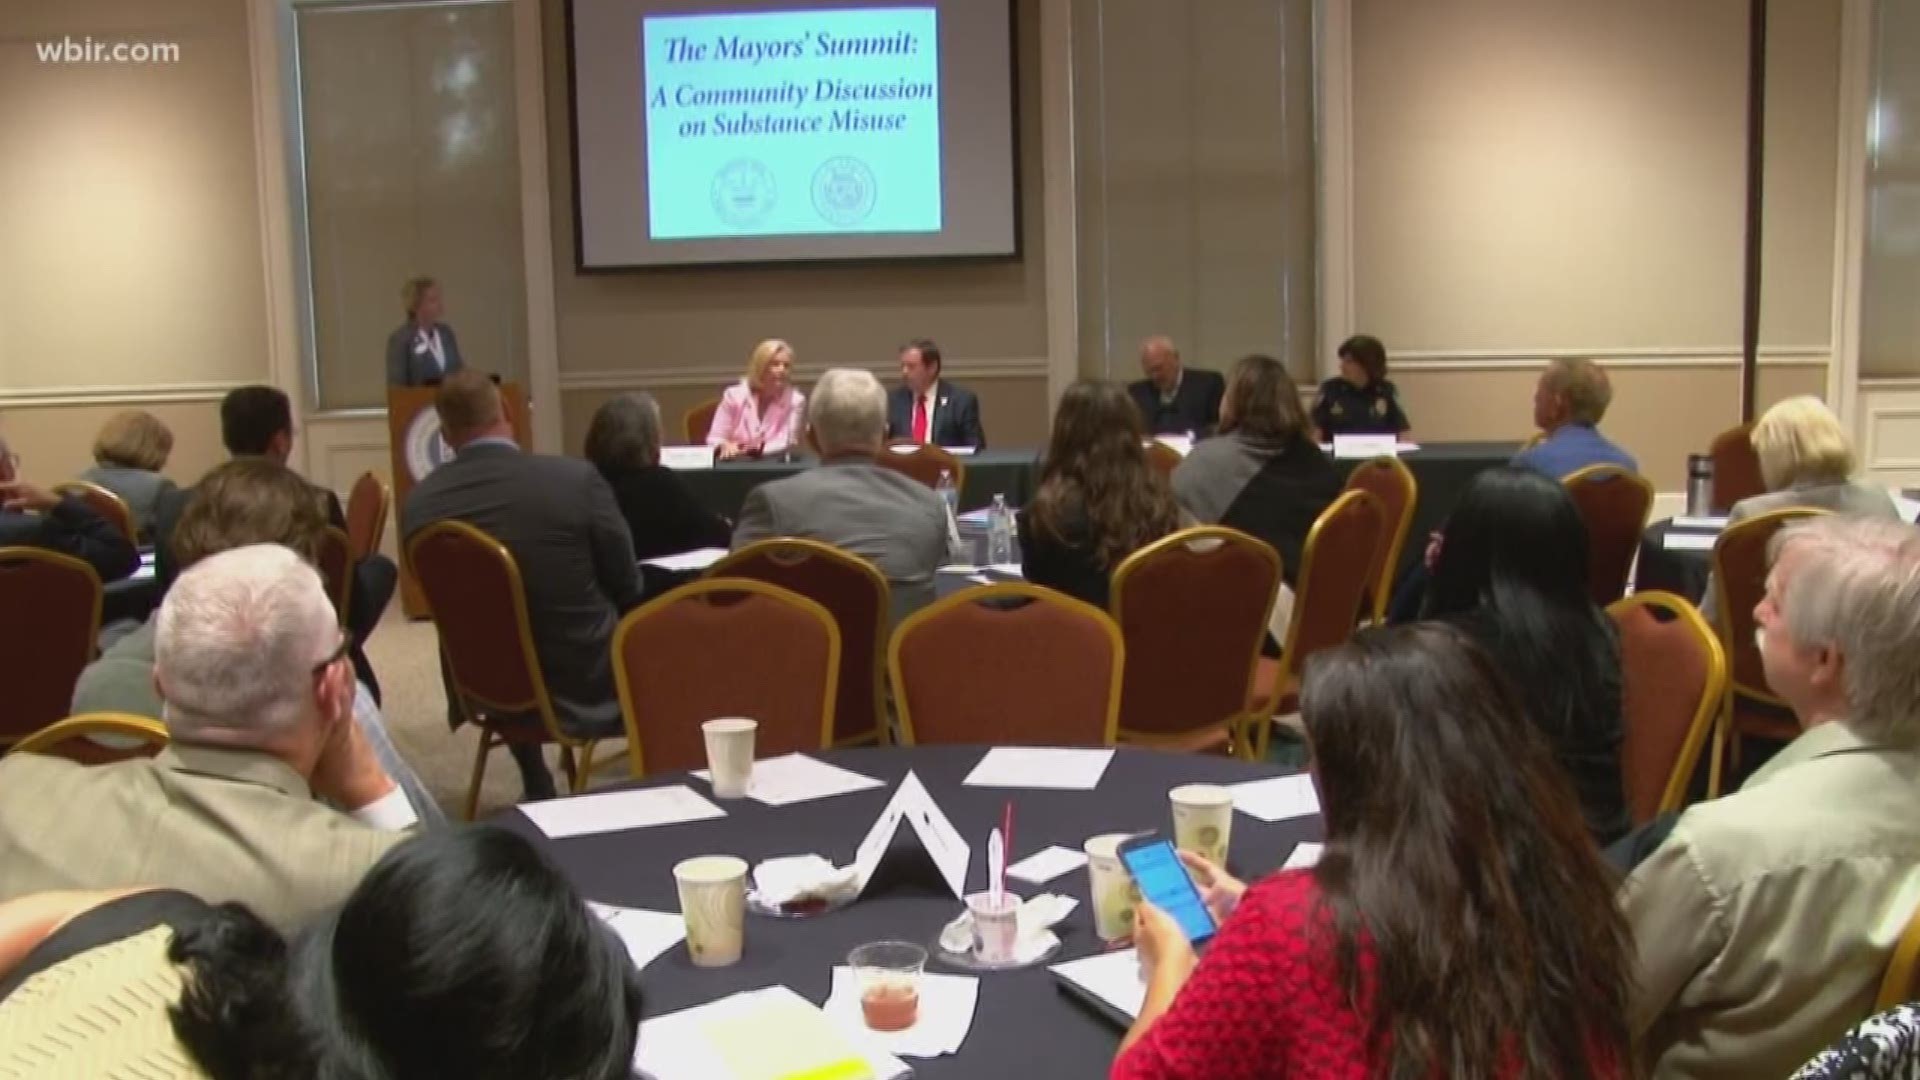 The Mayors' Summit on Substance Misuse addressed the impact the epidemic is having on our community.
	As 10 News reporter Marc Sallinger found, it's a scourge with a financial as well as a human impact.